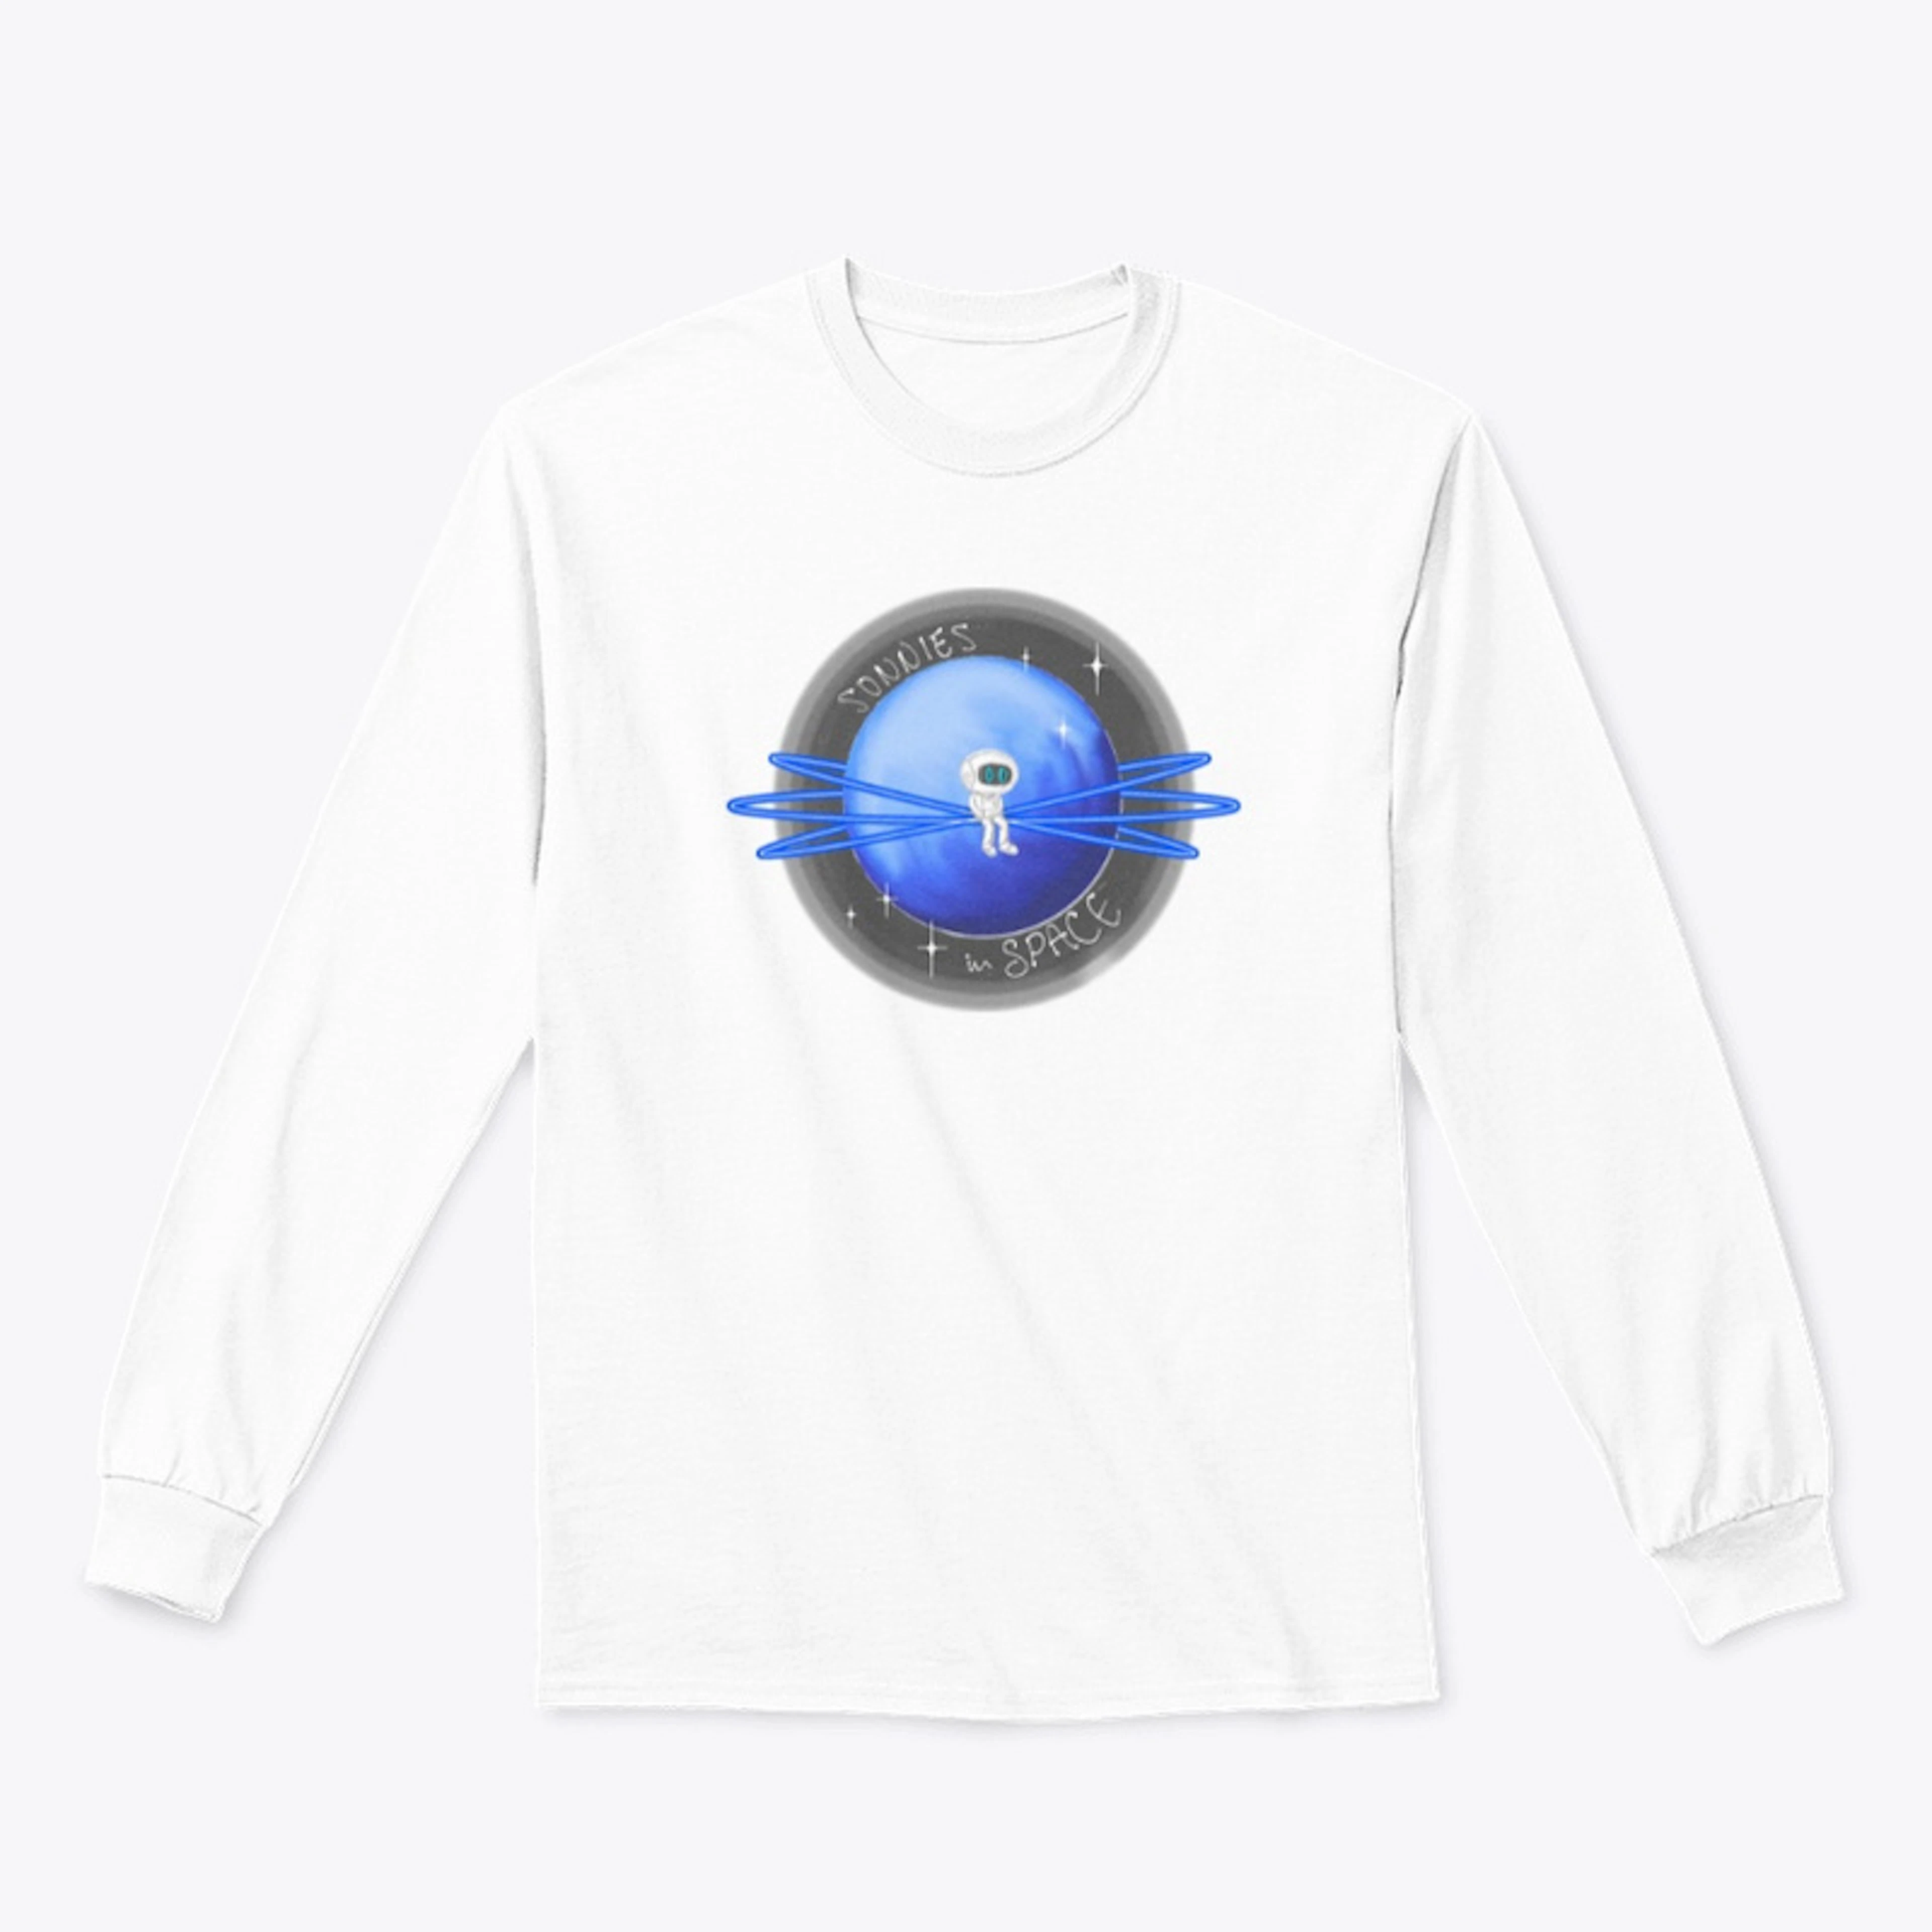 Sonnies In Space logo shirt